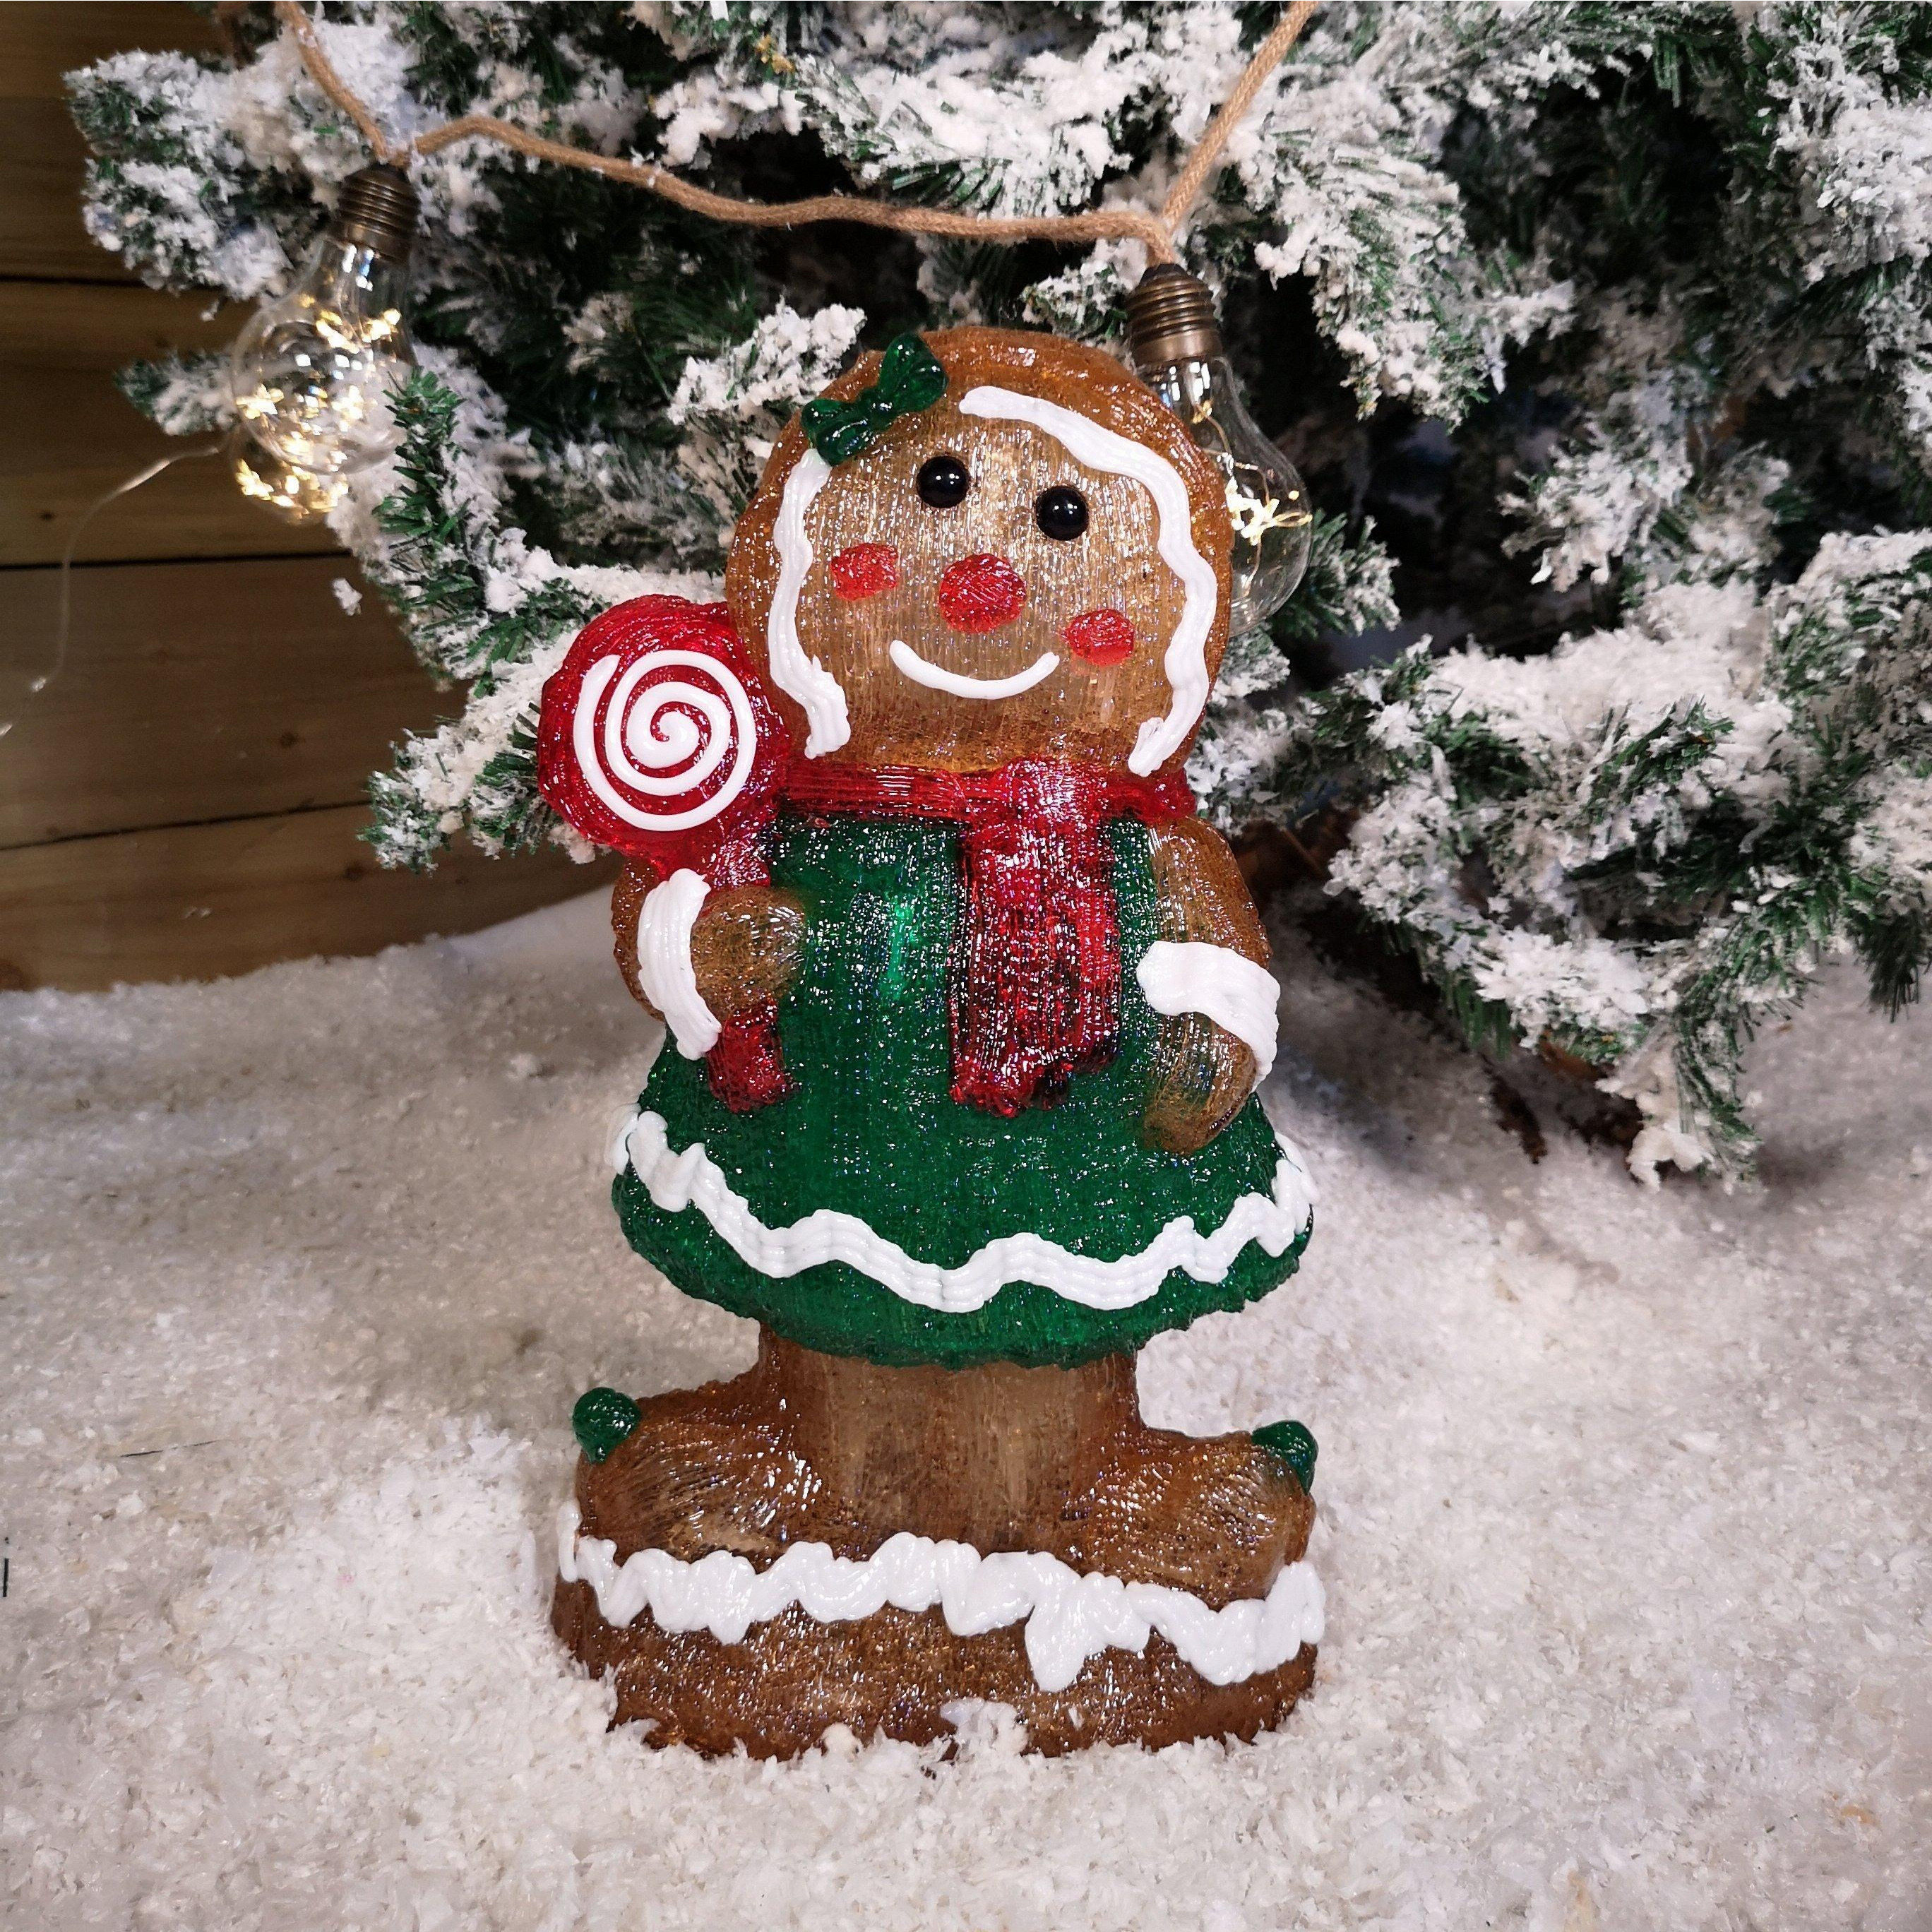 36cm LED Lit Acrylic Gingerbread Person Christmas Decoration with Green Dress - image 1